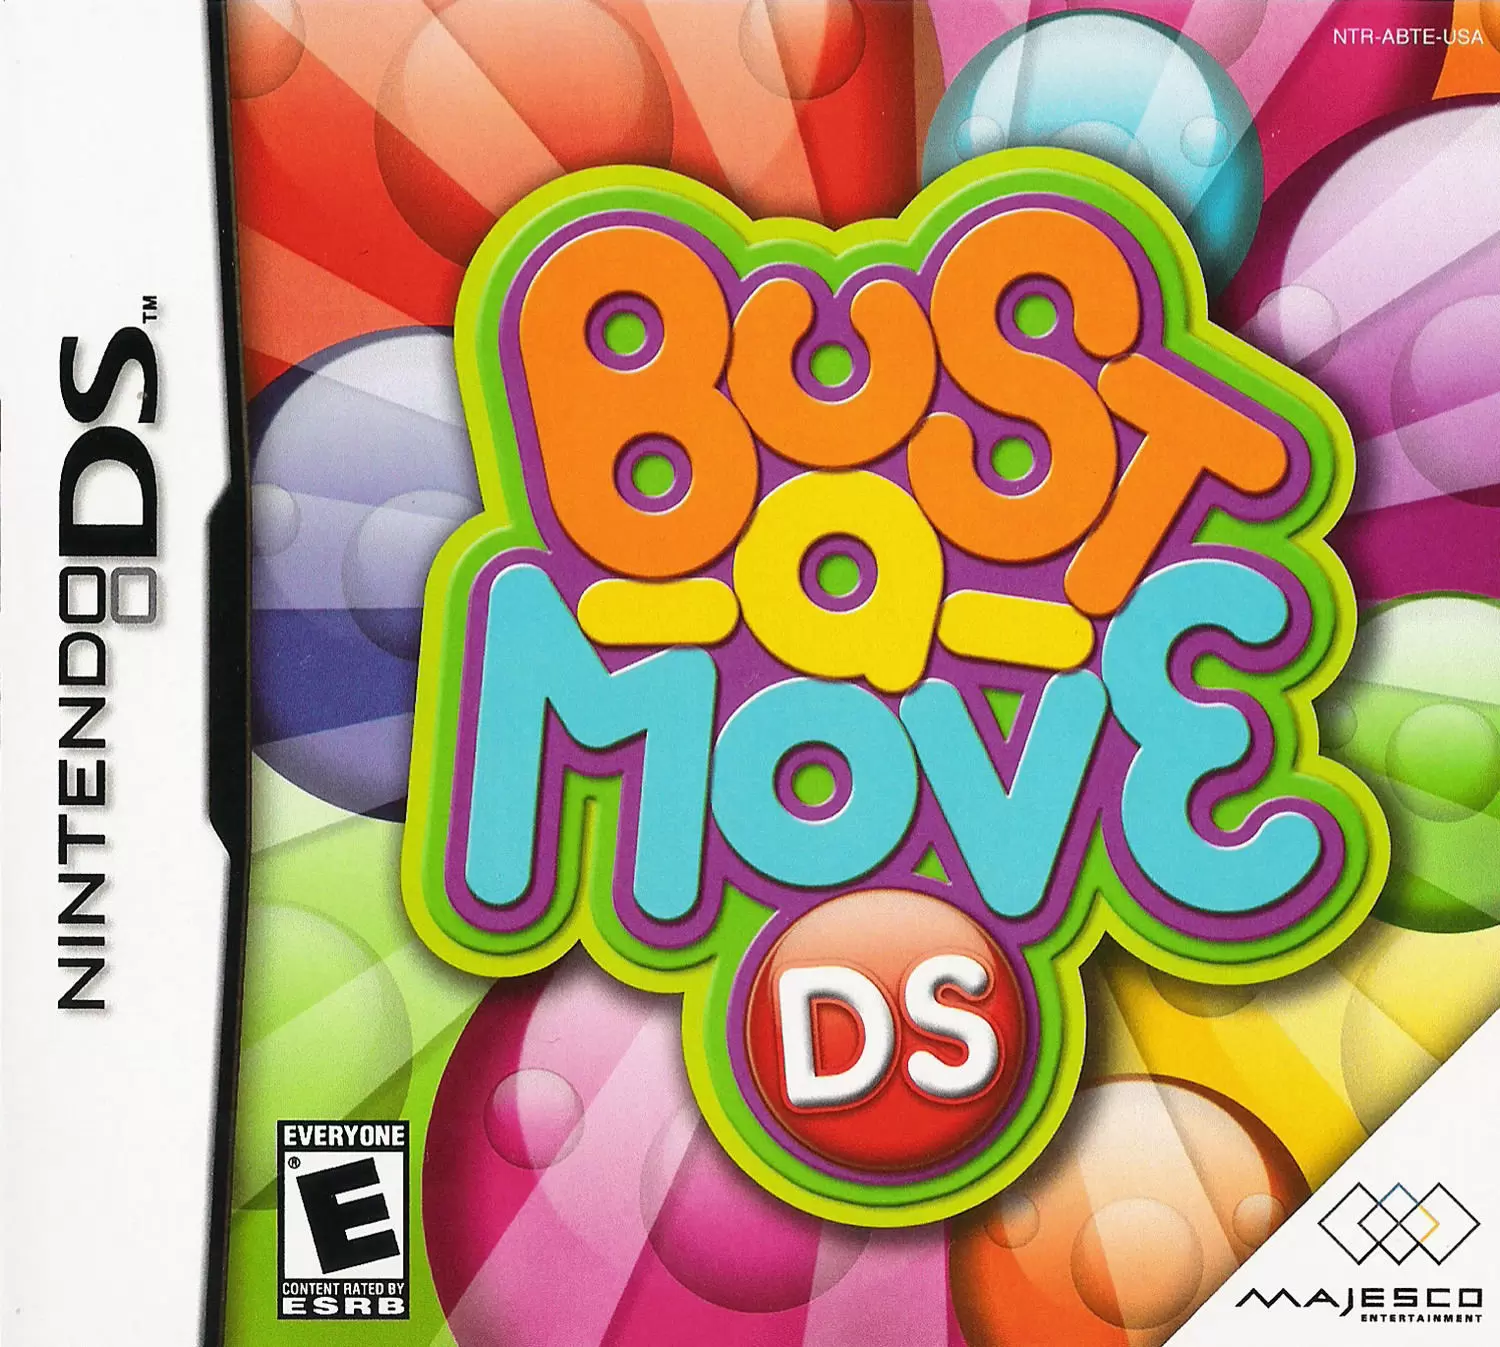 Nintendo DS Games - Bust-a-Move DS